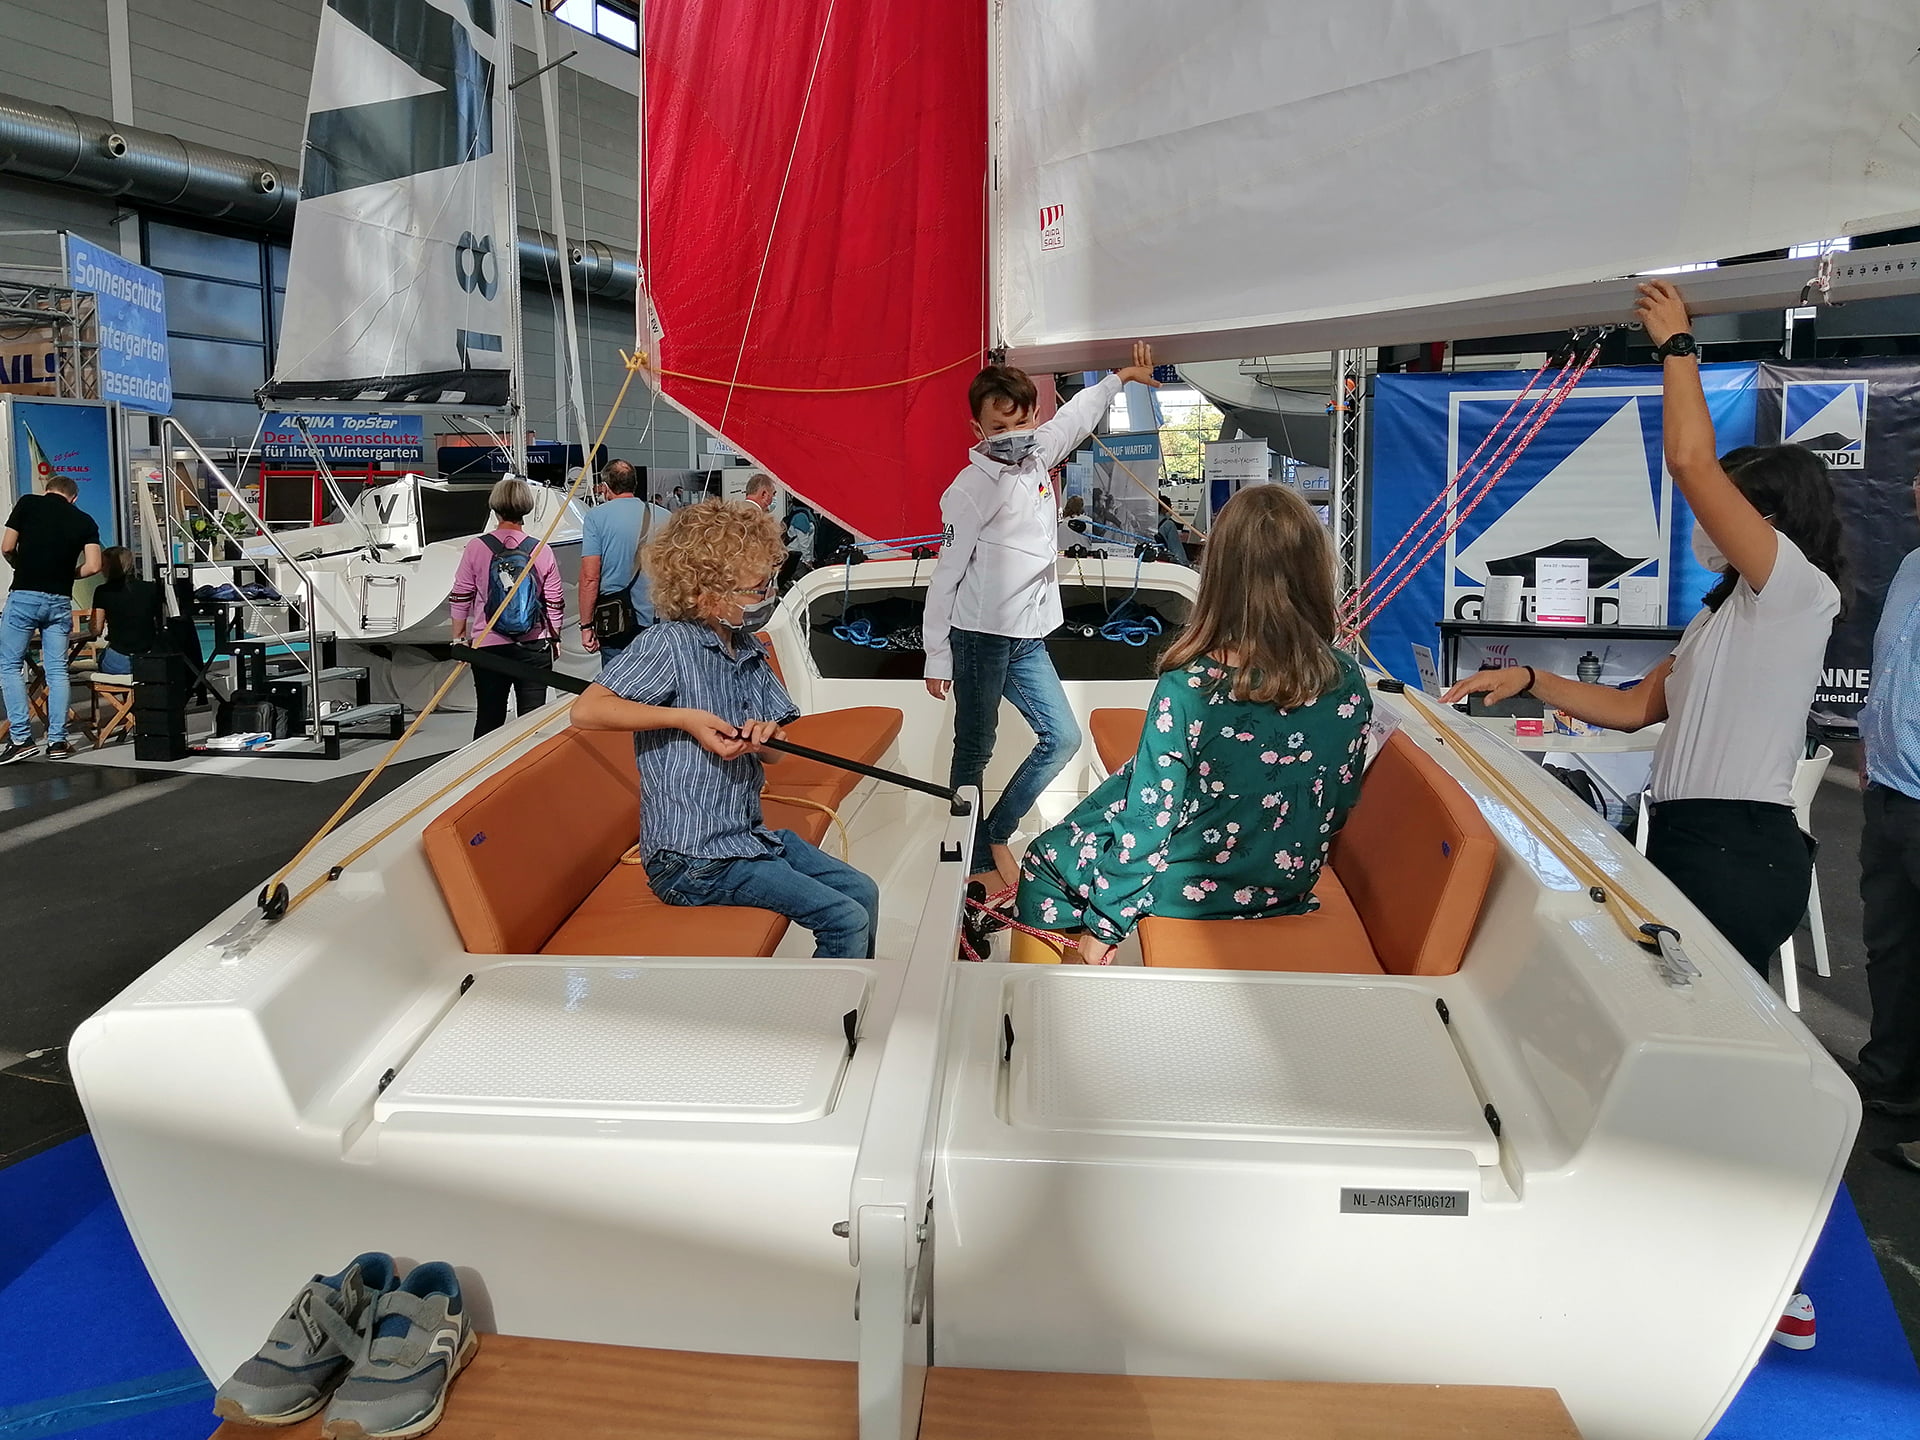  Young visitors at Interboot Friedrichshafen 